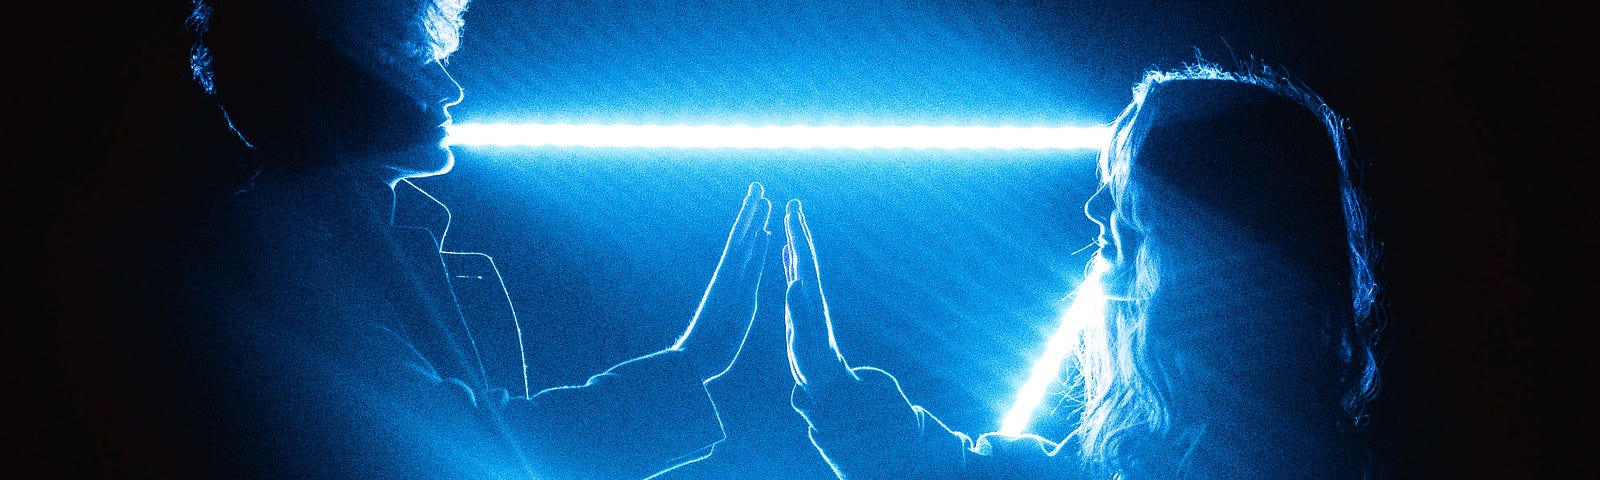 Couple joining hands against a triangle of blue light.